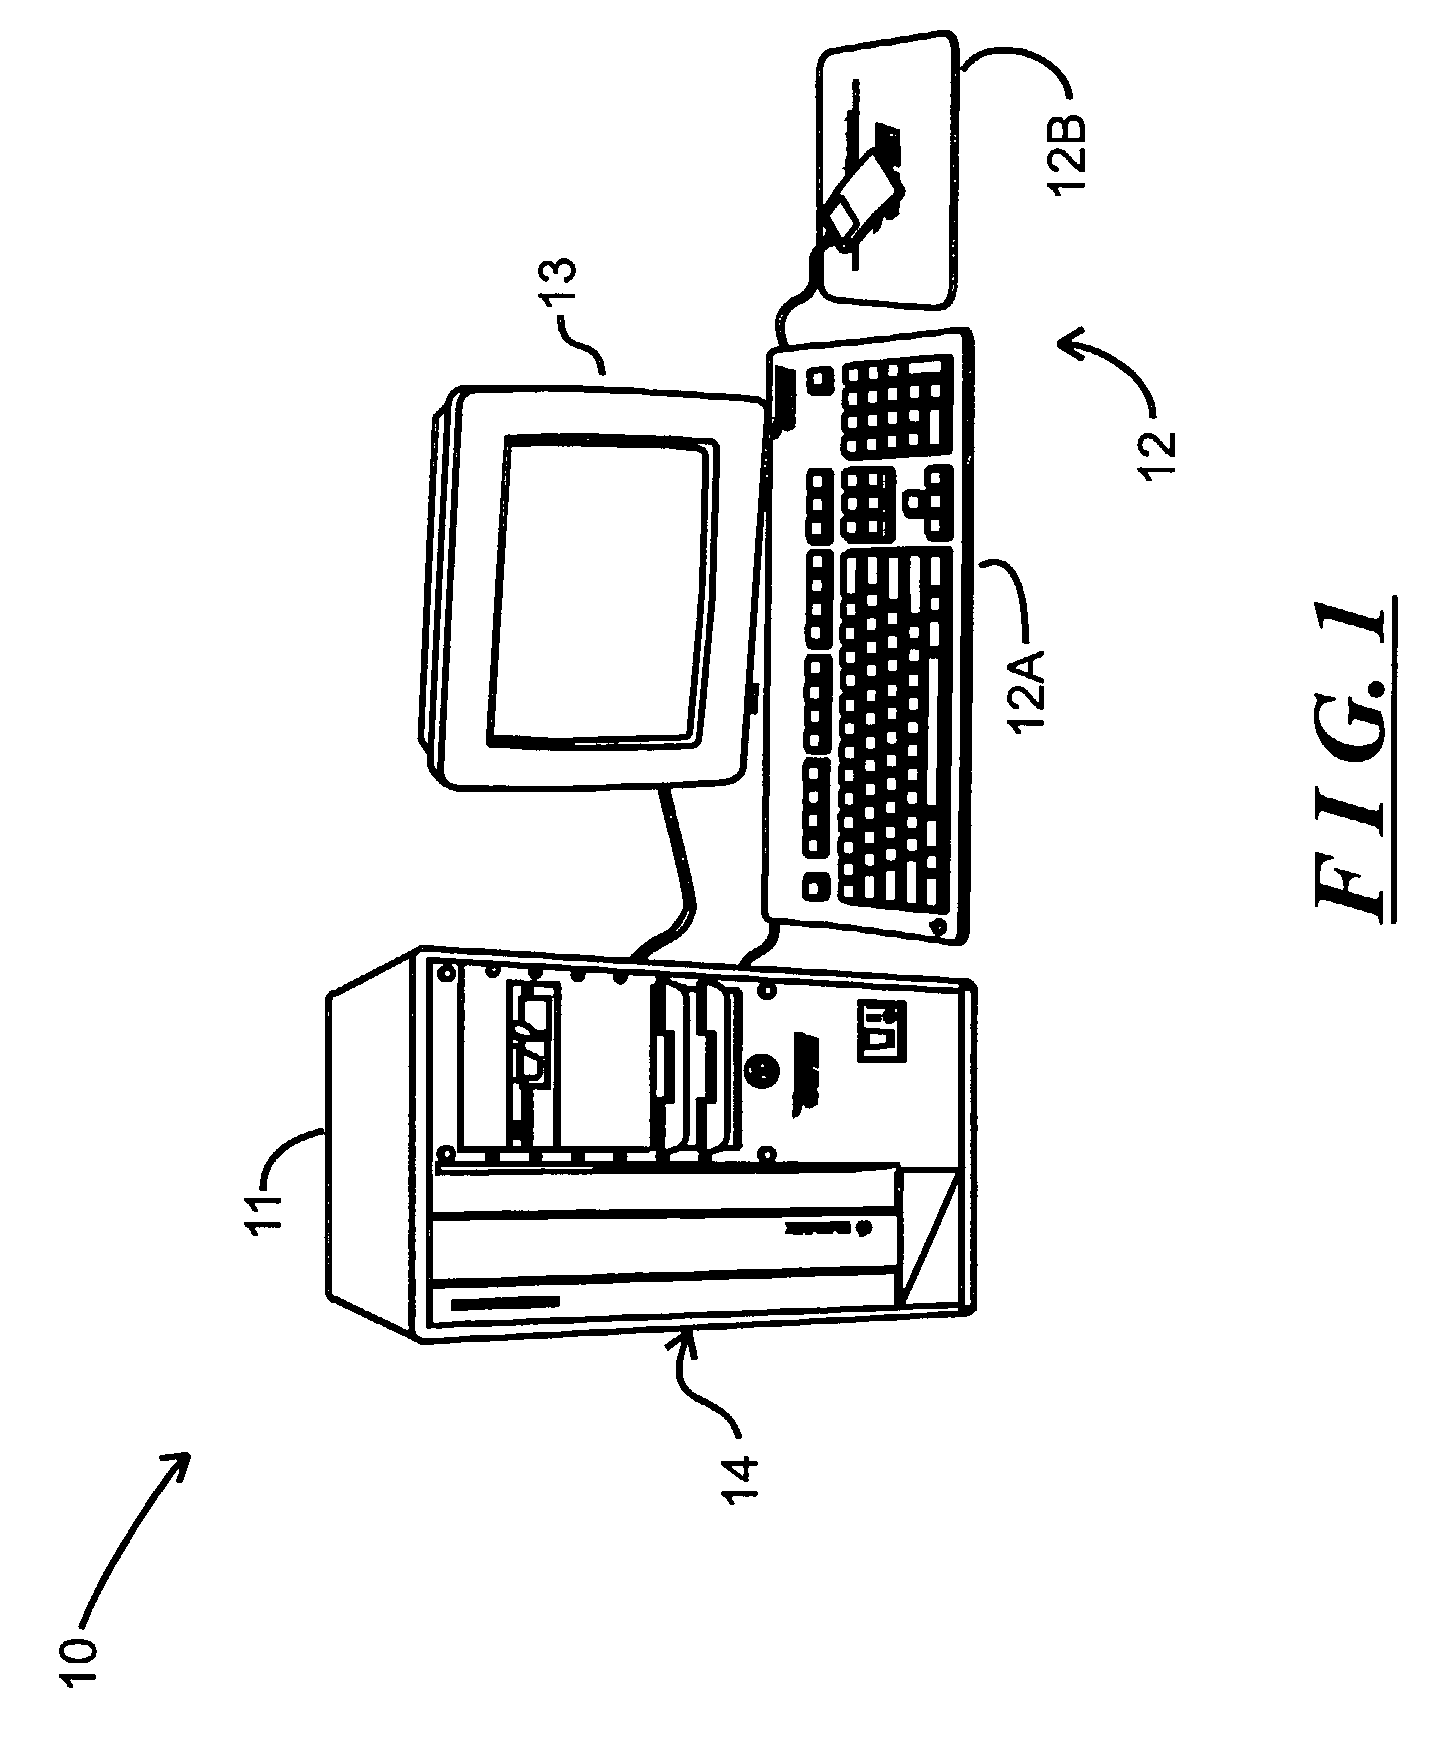 System and method for rendering images using a strictly-deterministic methodology including recursive rotations for generating sample points